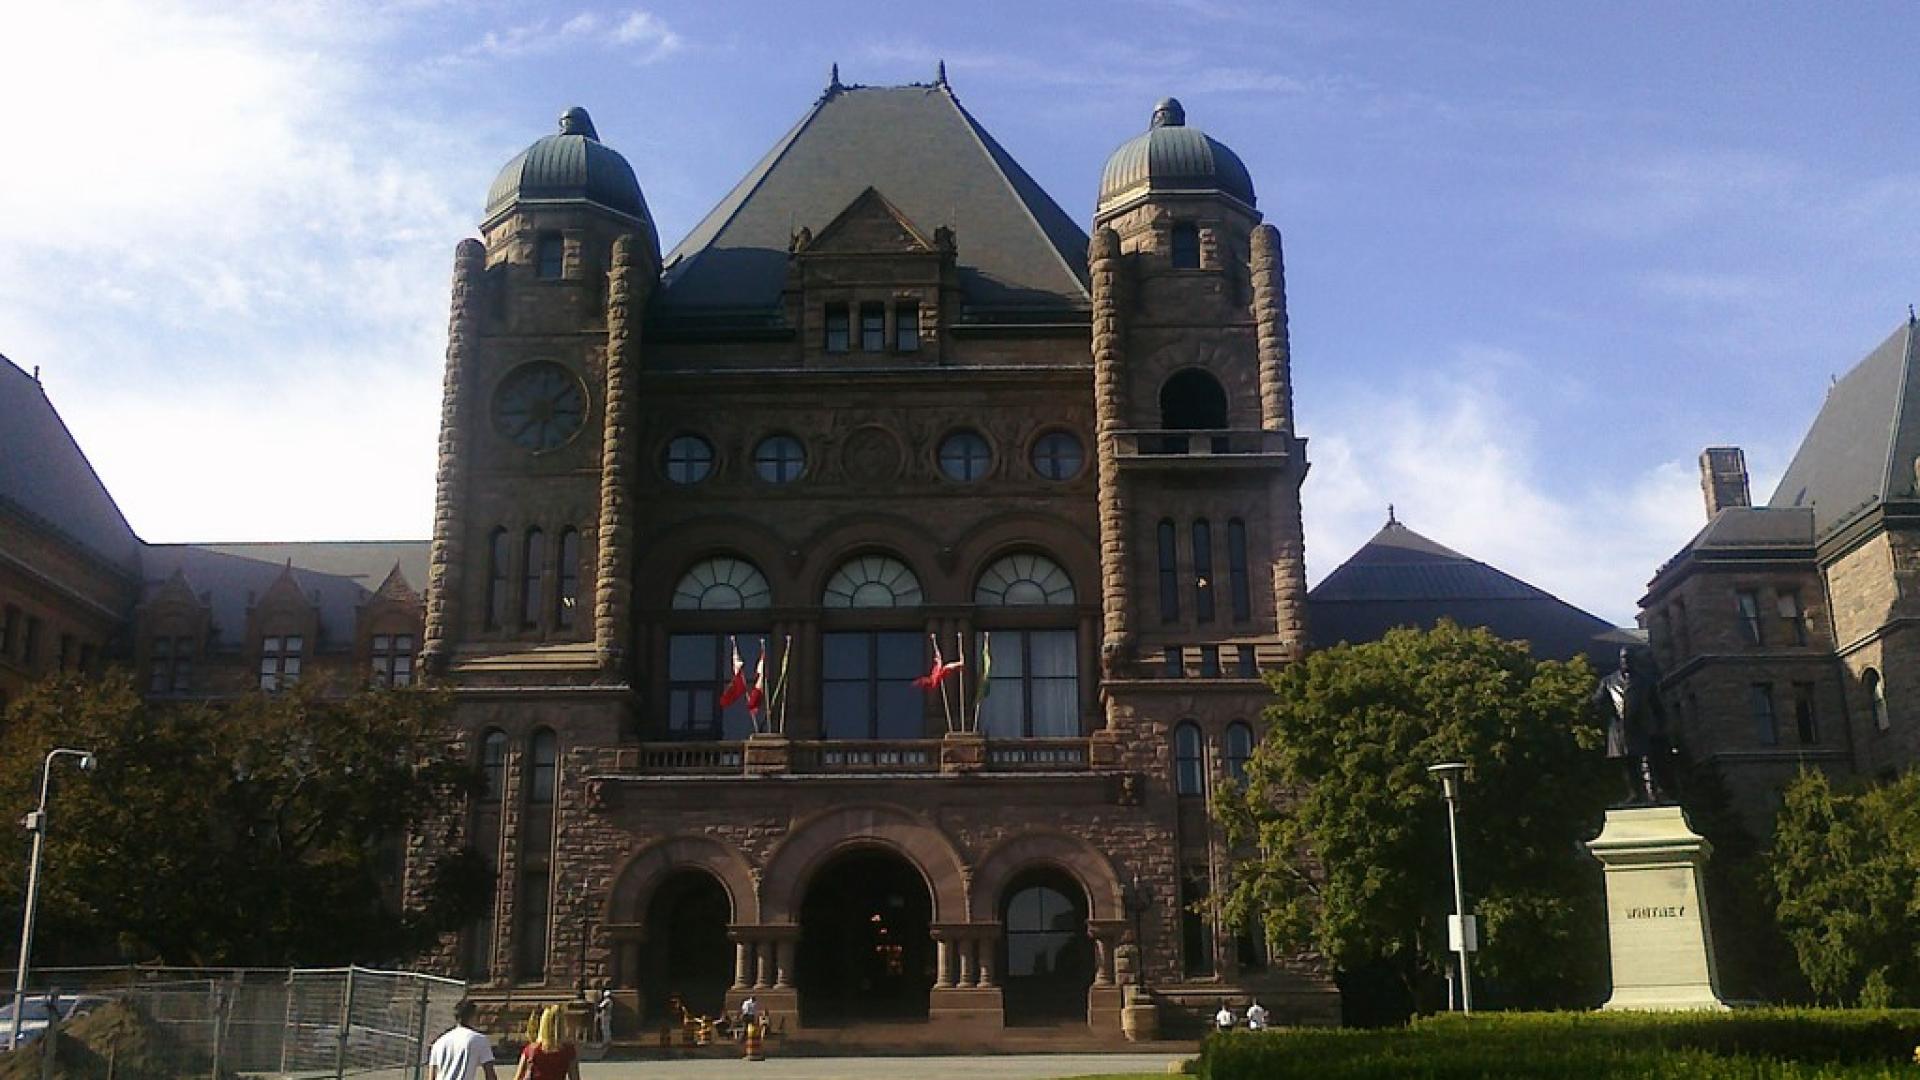 Water Matters - The exterior of the Ontario Legislative Assembly